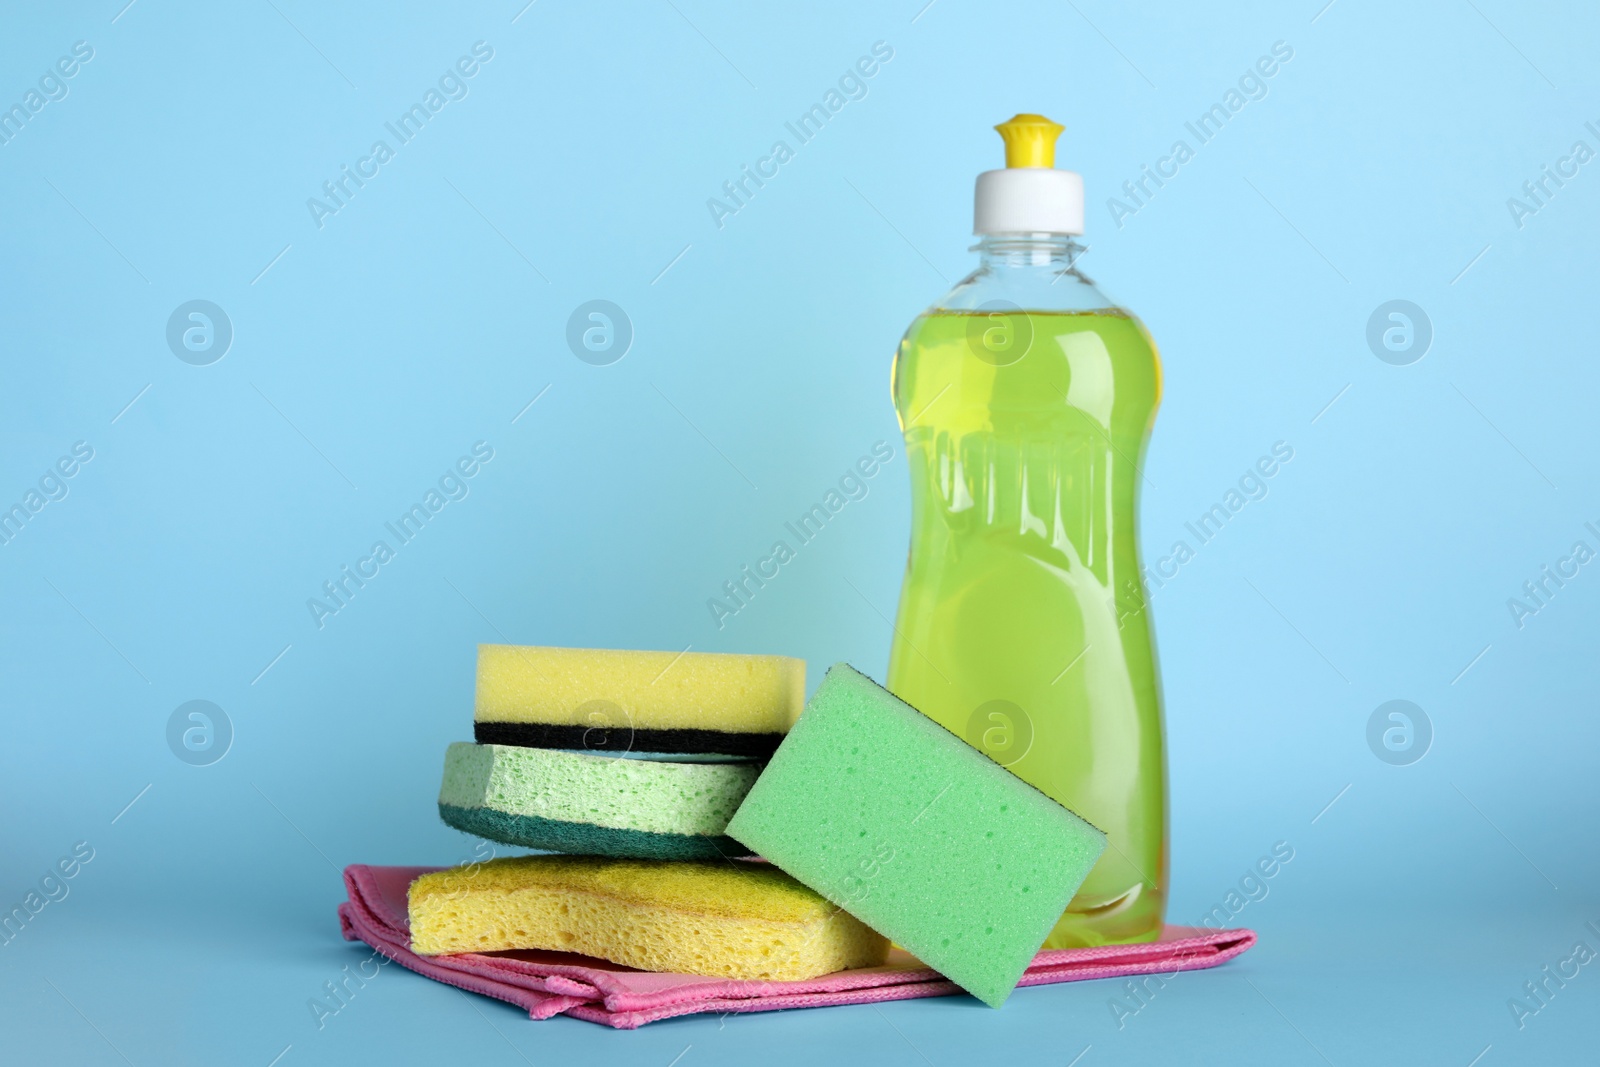 Photo of Sponges and other cleaning products on light blue background